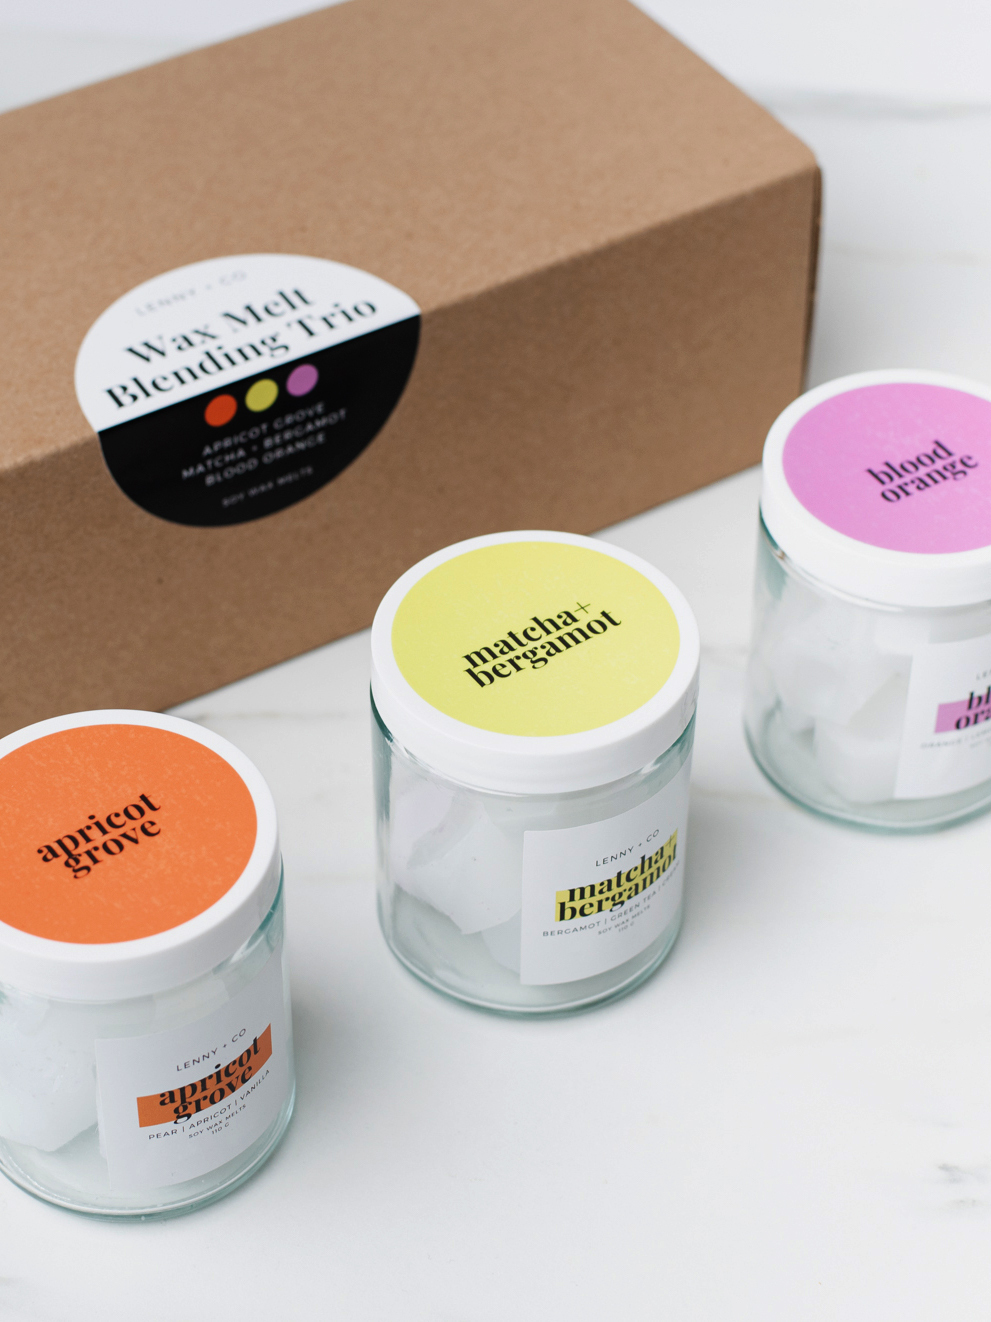 Three jars with orange, yellow, and purple labels are placed beside a closed cardboard box. There is a label that says "wax melt blending trio" on the closed box. 